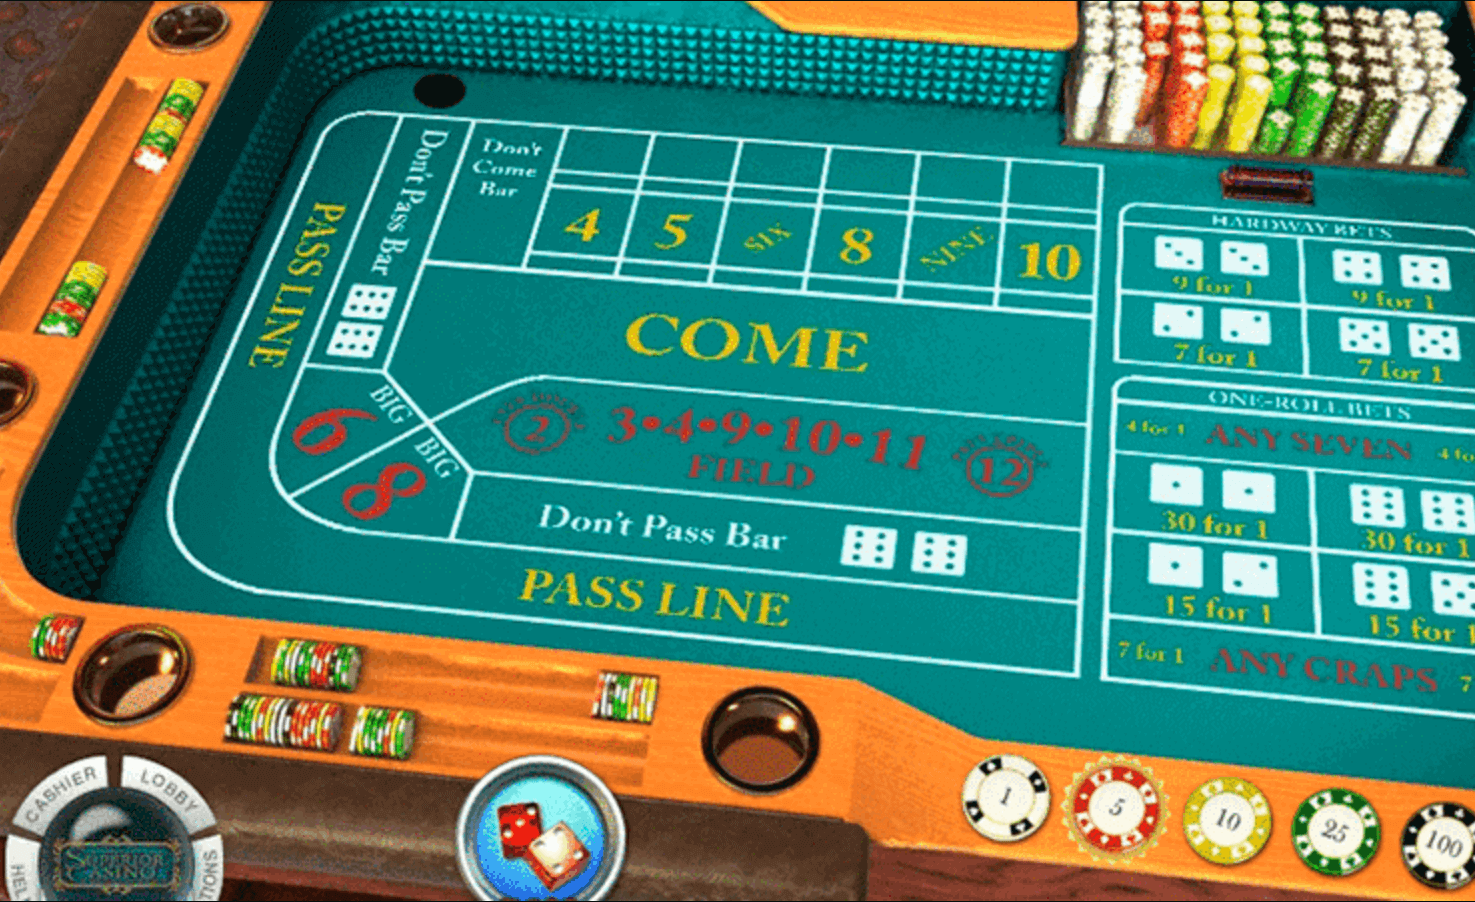 screenshot of a craps table showing betting interface